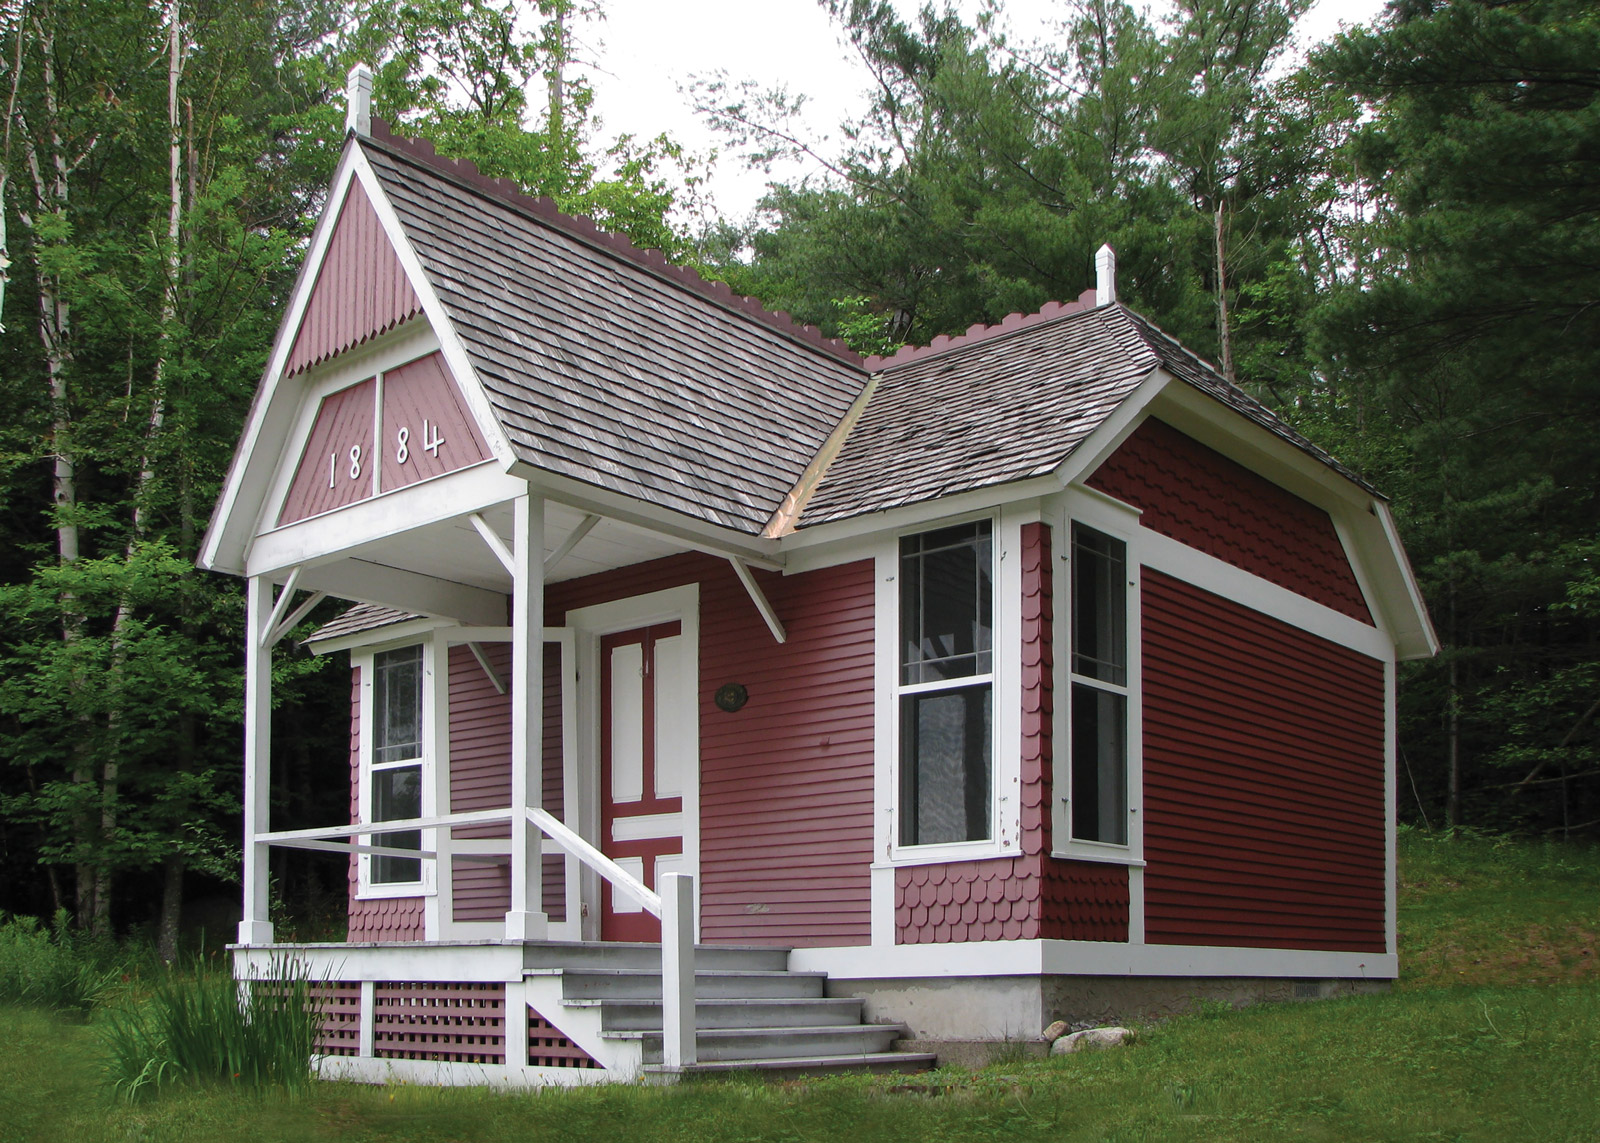 The first building constructed for Edward Trudeau’s Adirondack Cottage Sanitarium. Built in 1884, the Little Red, as it was known, hosted its first two patients in February of the following year.